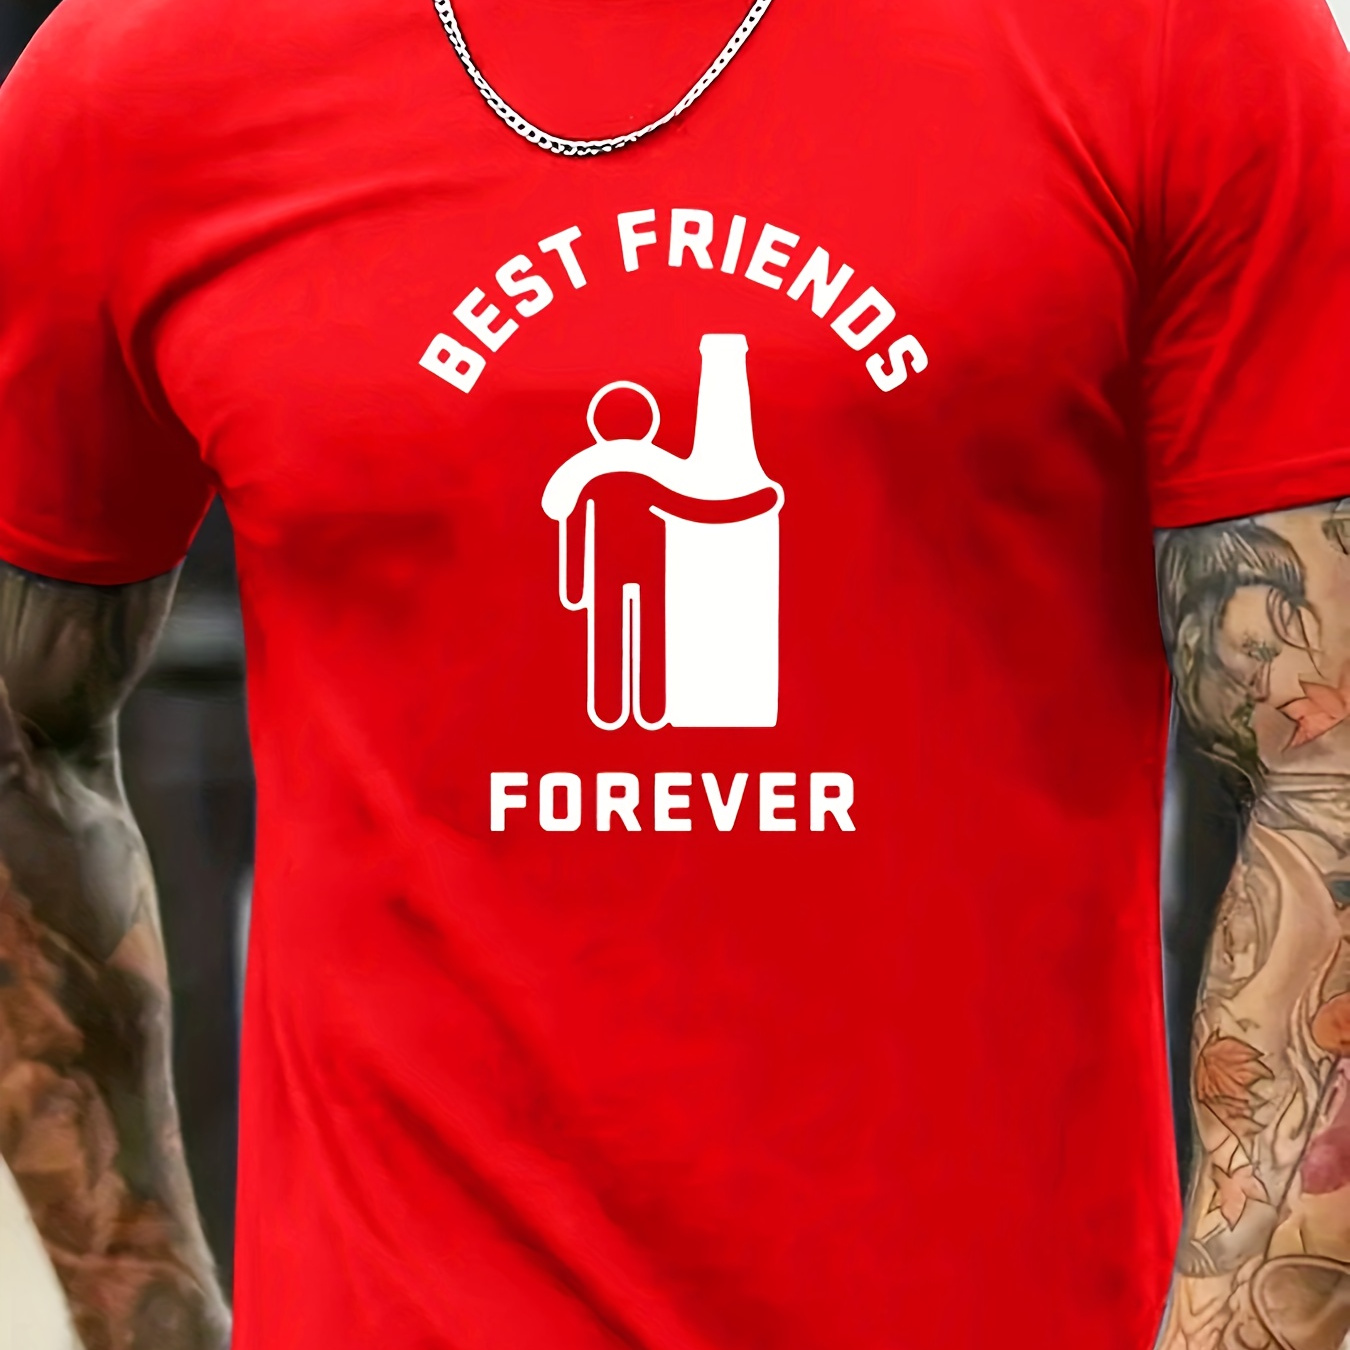 

Best Friends Forever Print Men's Trendy Short Sleeve T-shirts, Comfy Casual Breathable Tops For Men's Fitness Training, Jogging, Outdoor Activities